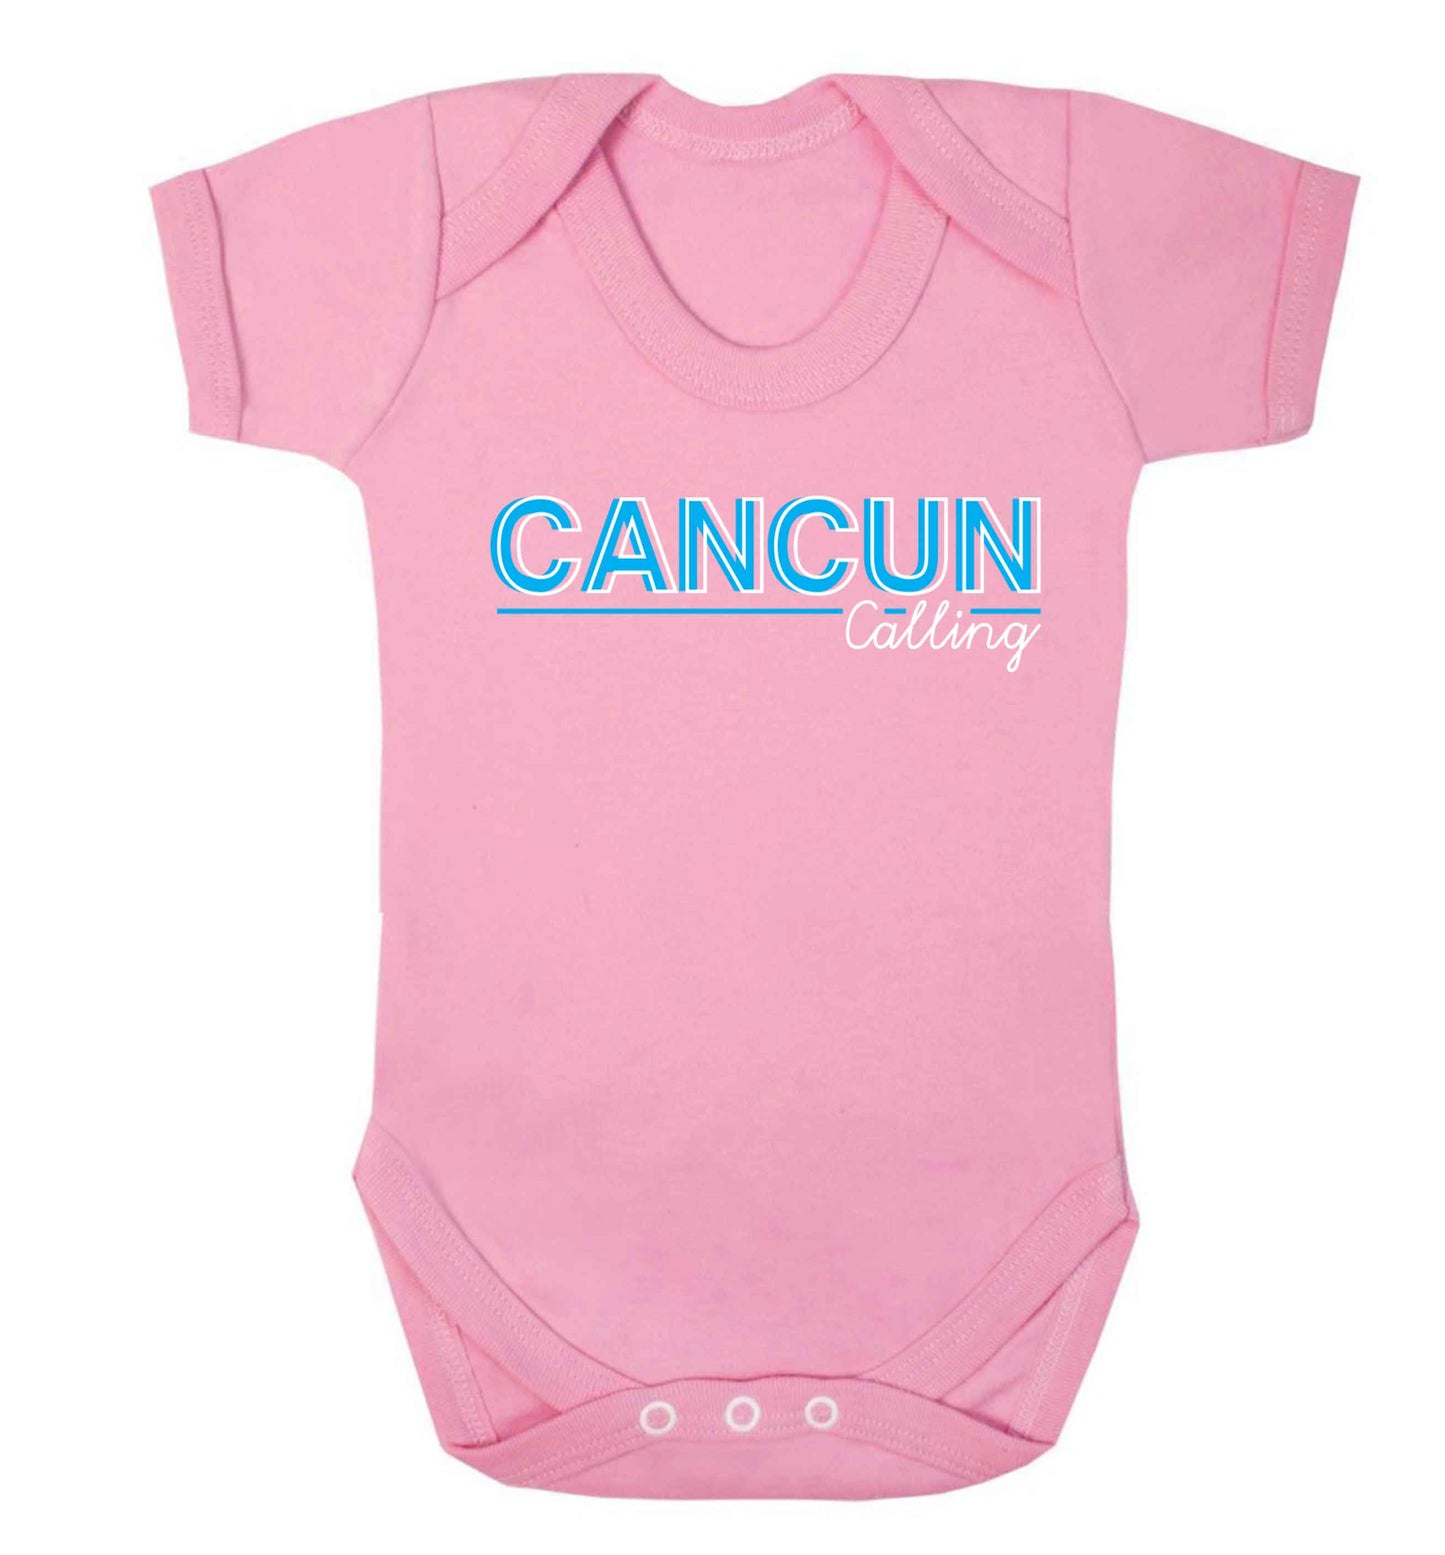 Cancun calling Baby Vest pale pink 18-24 months